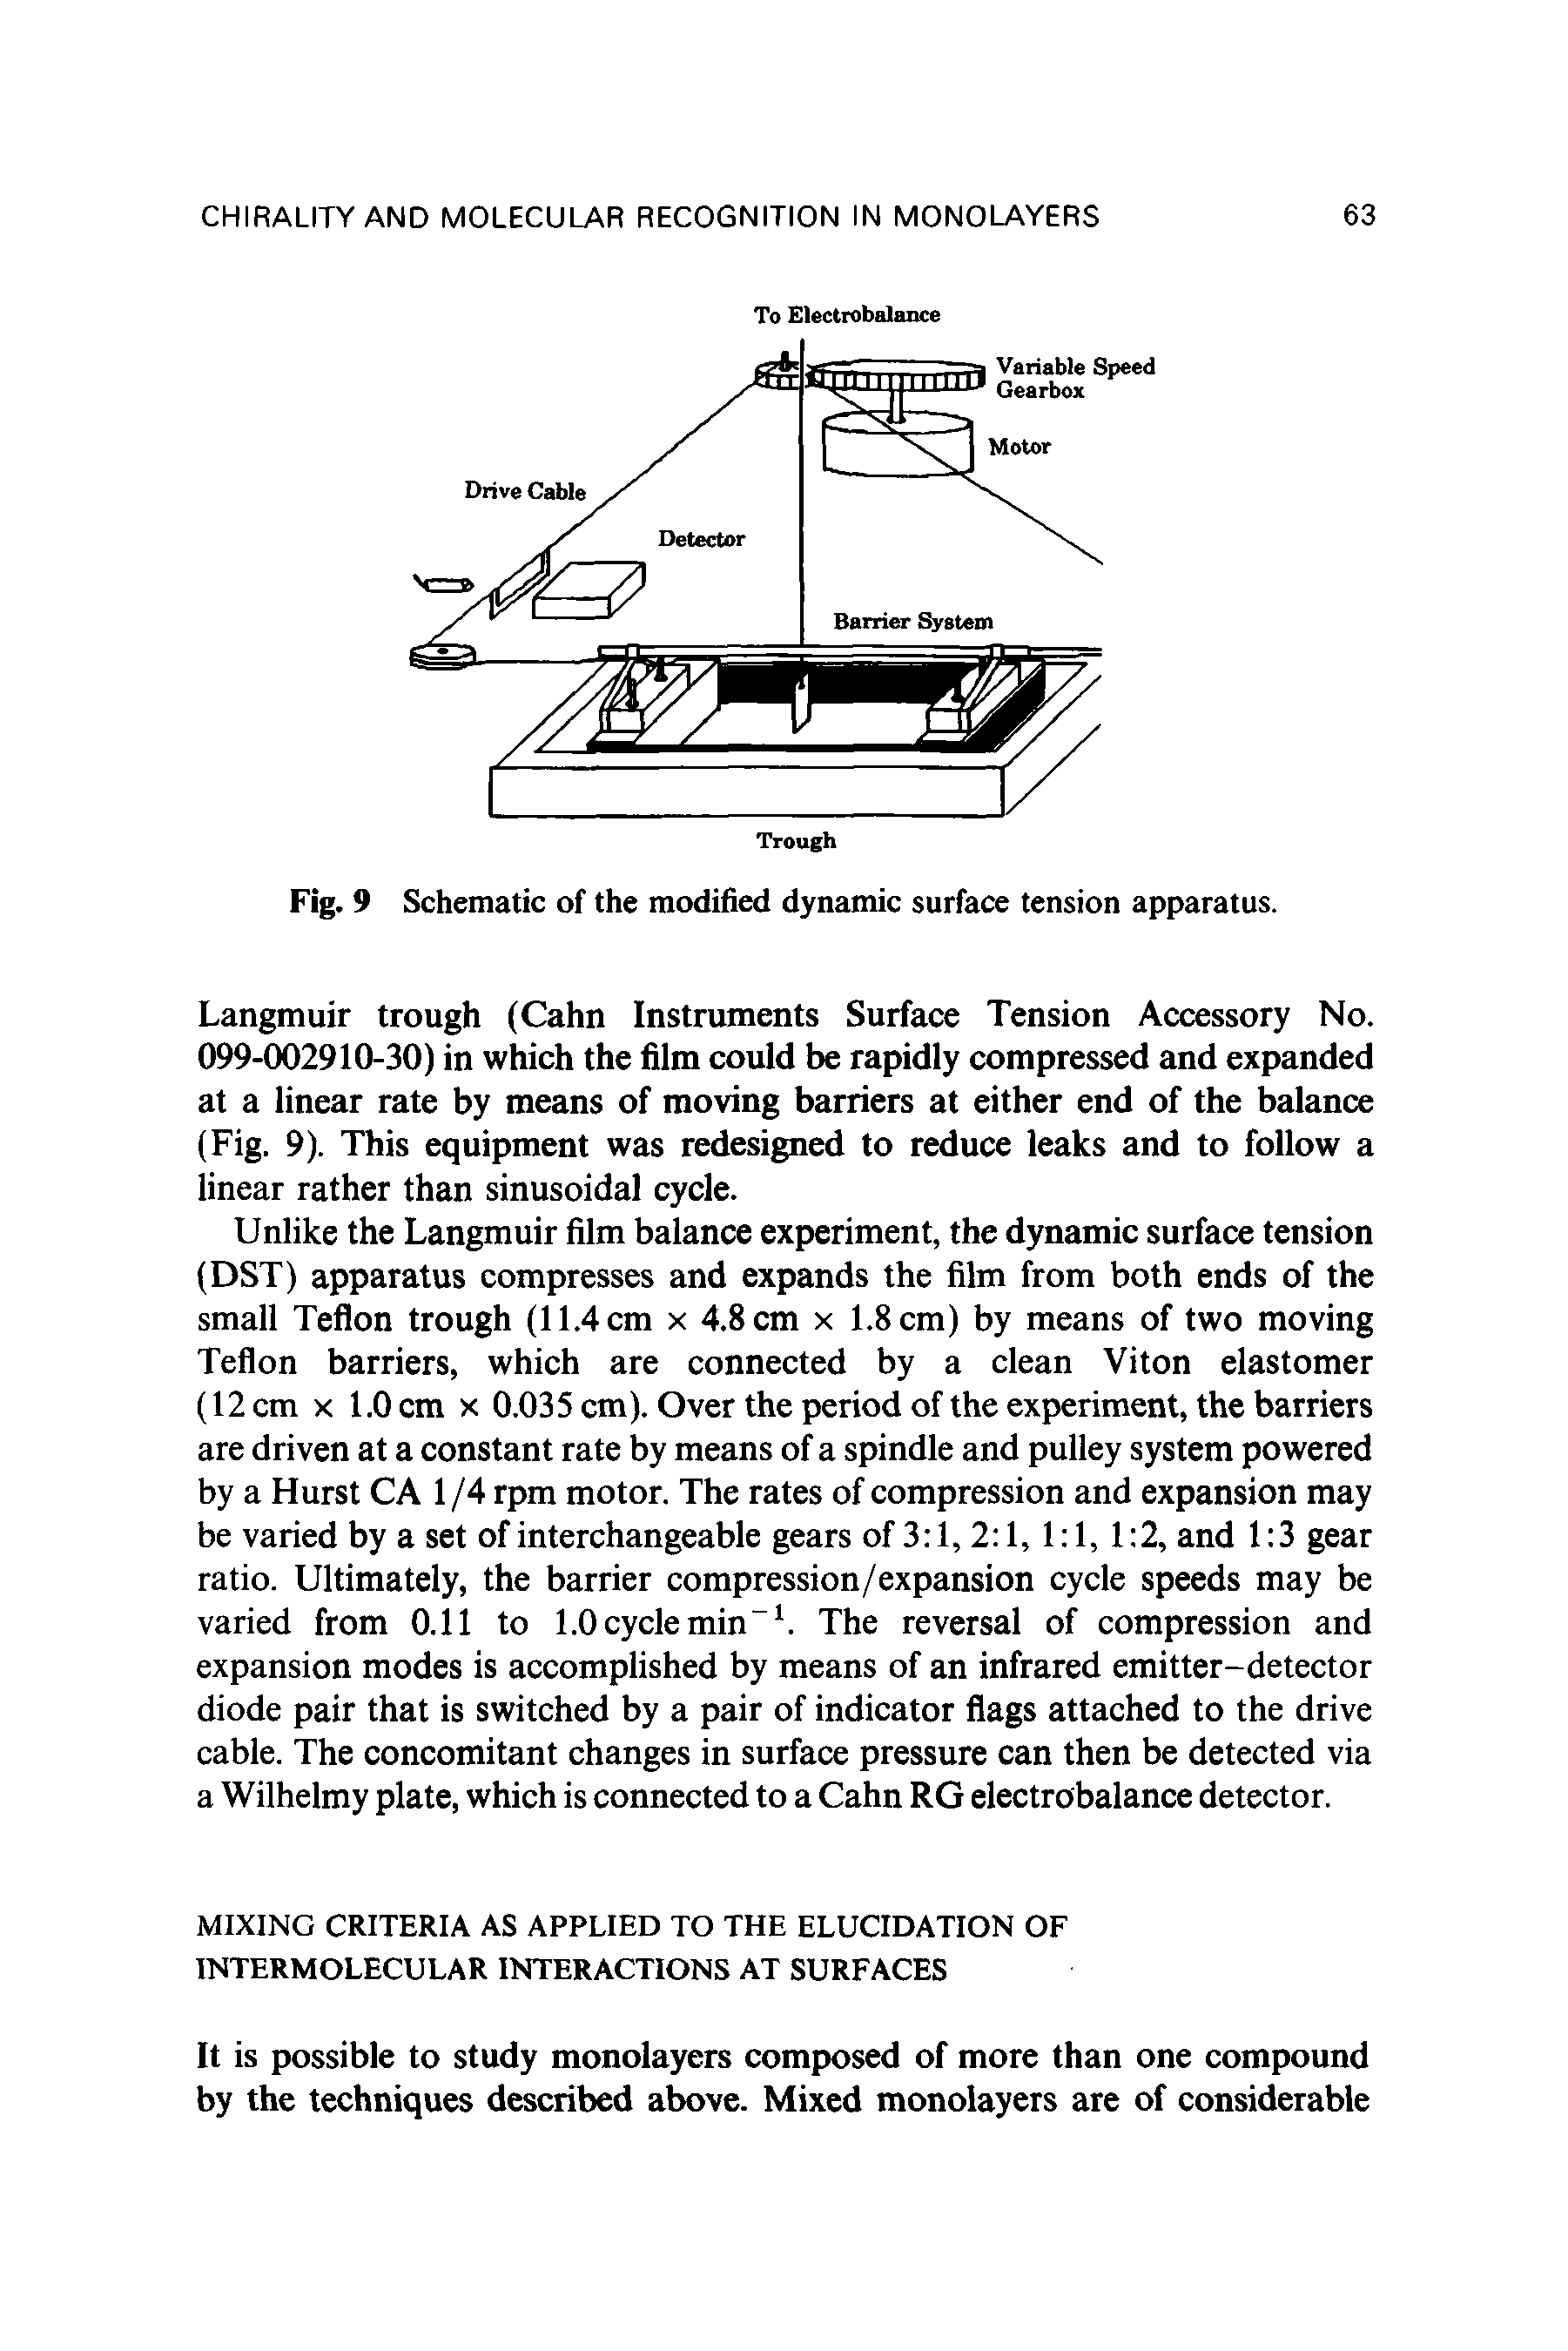 Fig. 9 Schematic of the modified dynamic surface tension apparatus.